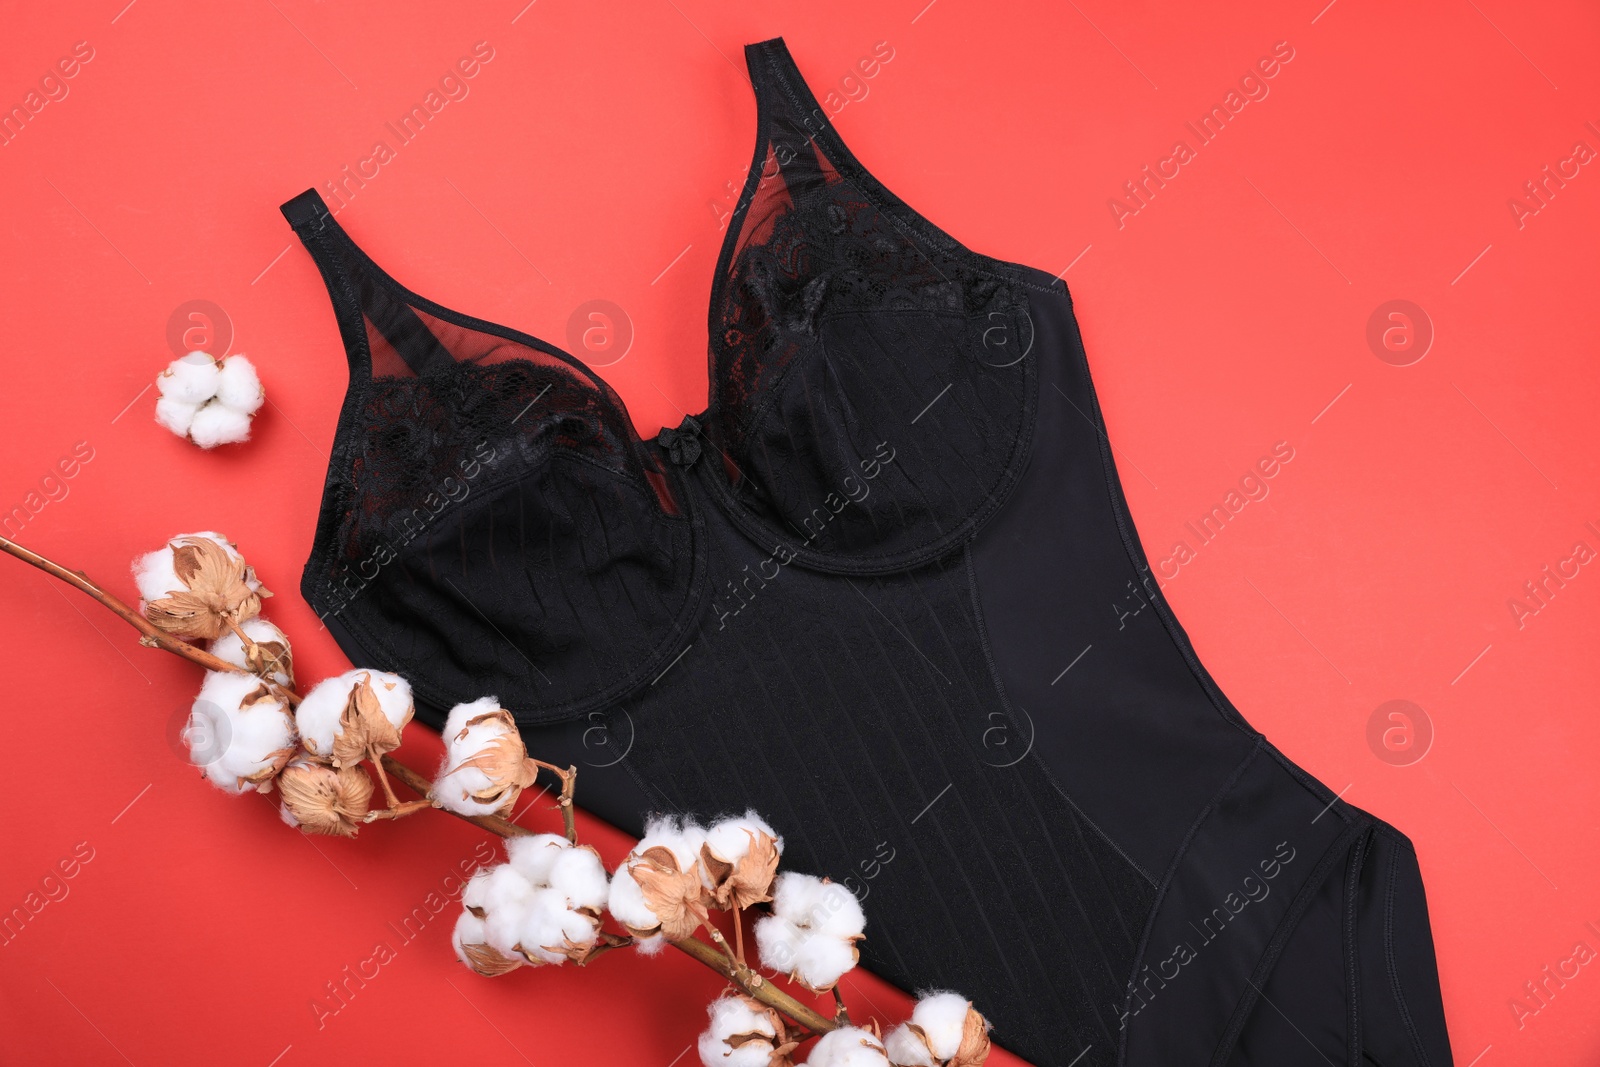 Photo of Elegant plus size black women's underwear and cotton flowers on coral background, flat lay